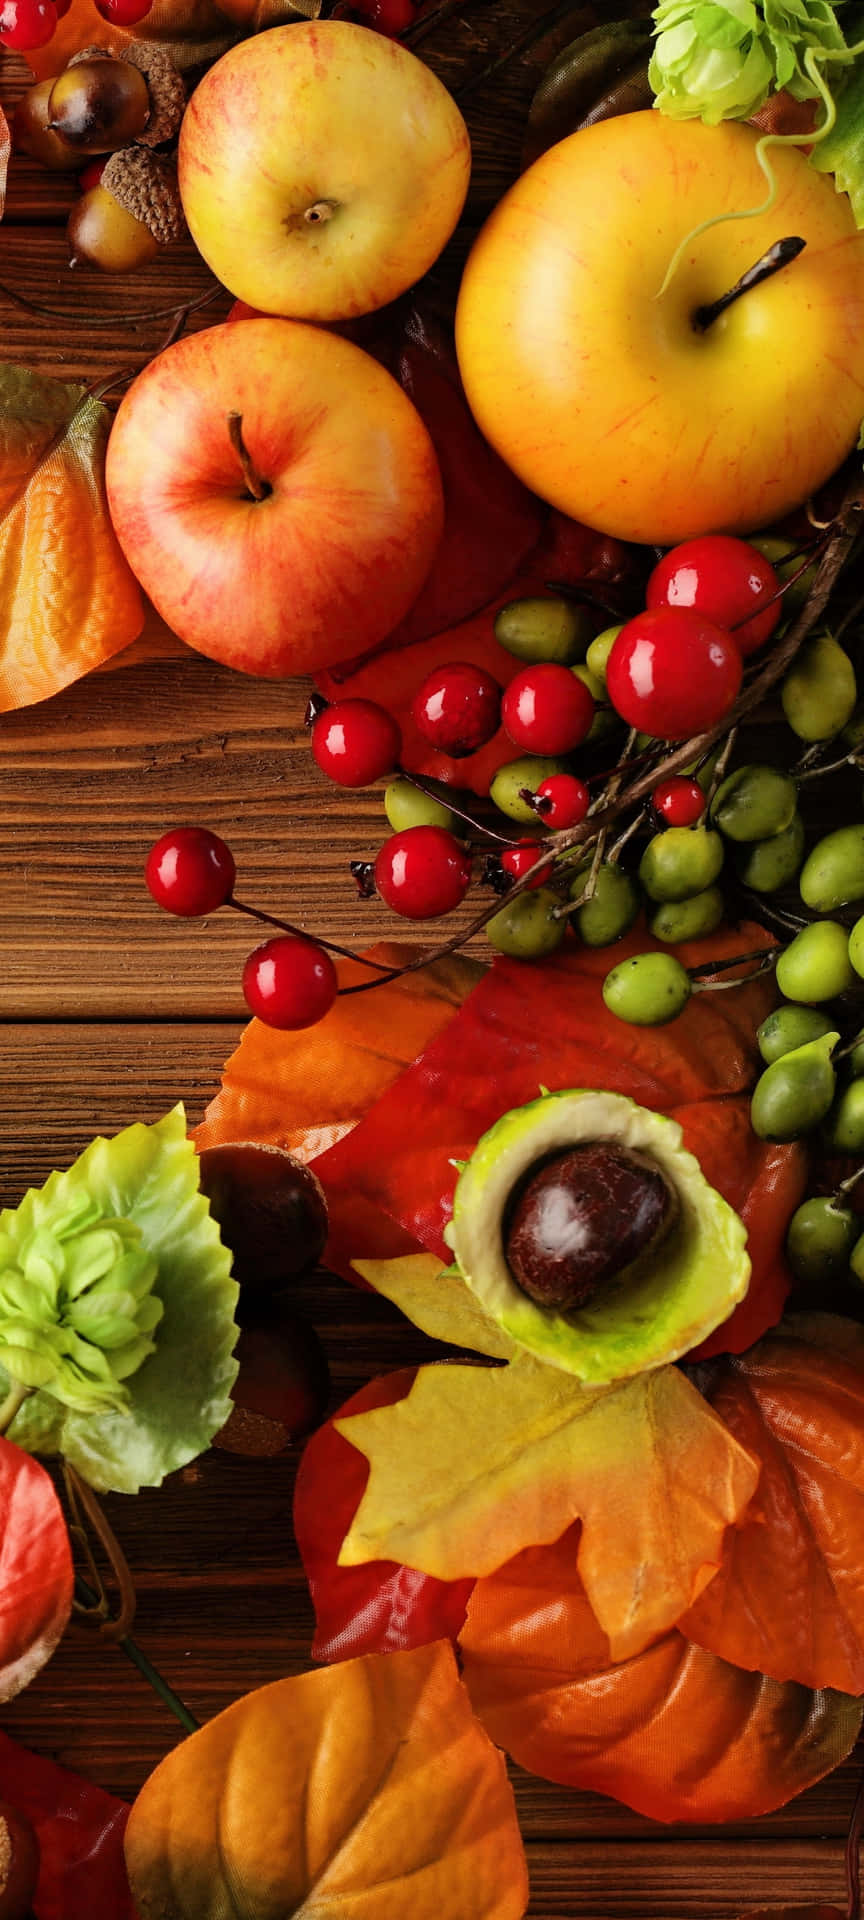 Fall Harvest - Abundance and Colors of Autumn Wallpaper